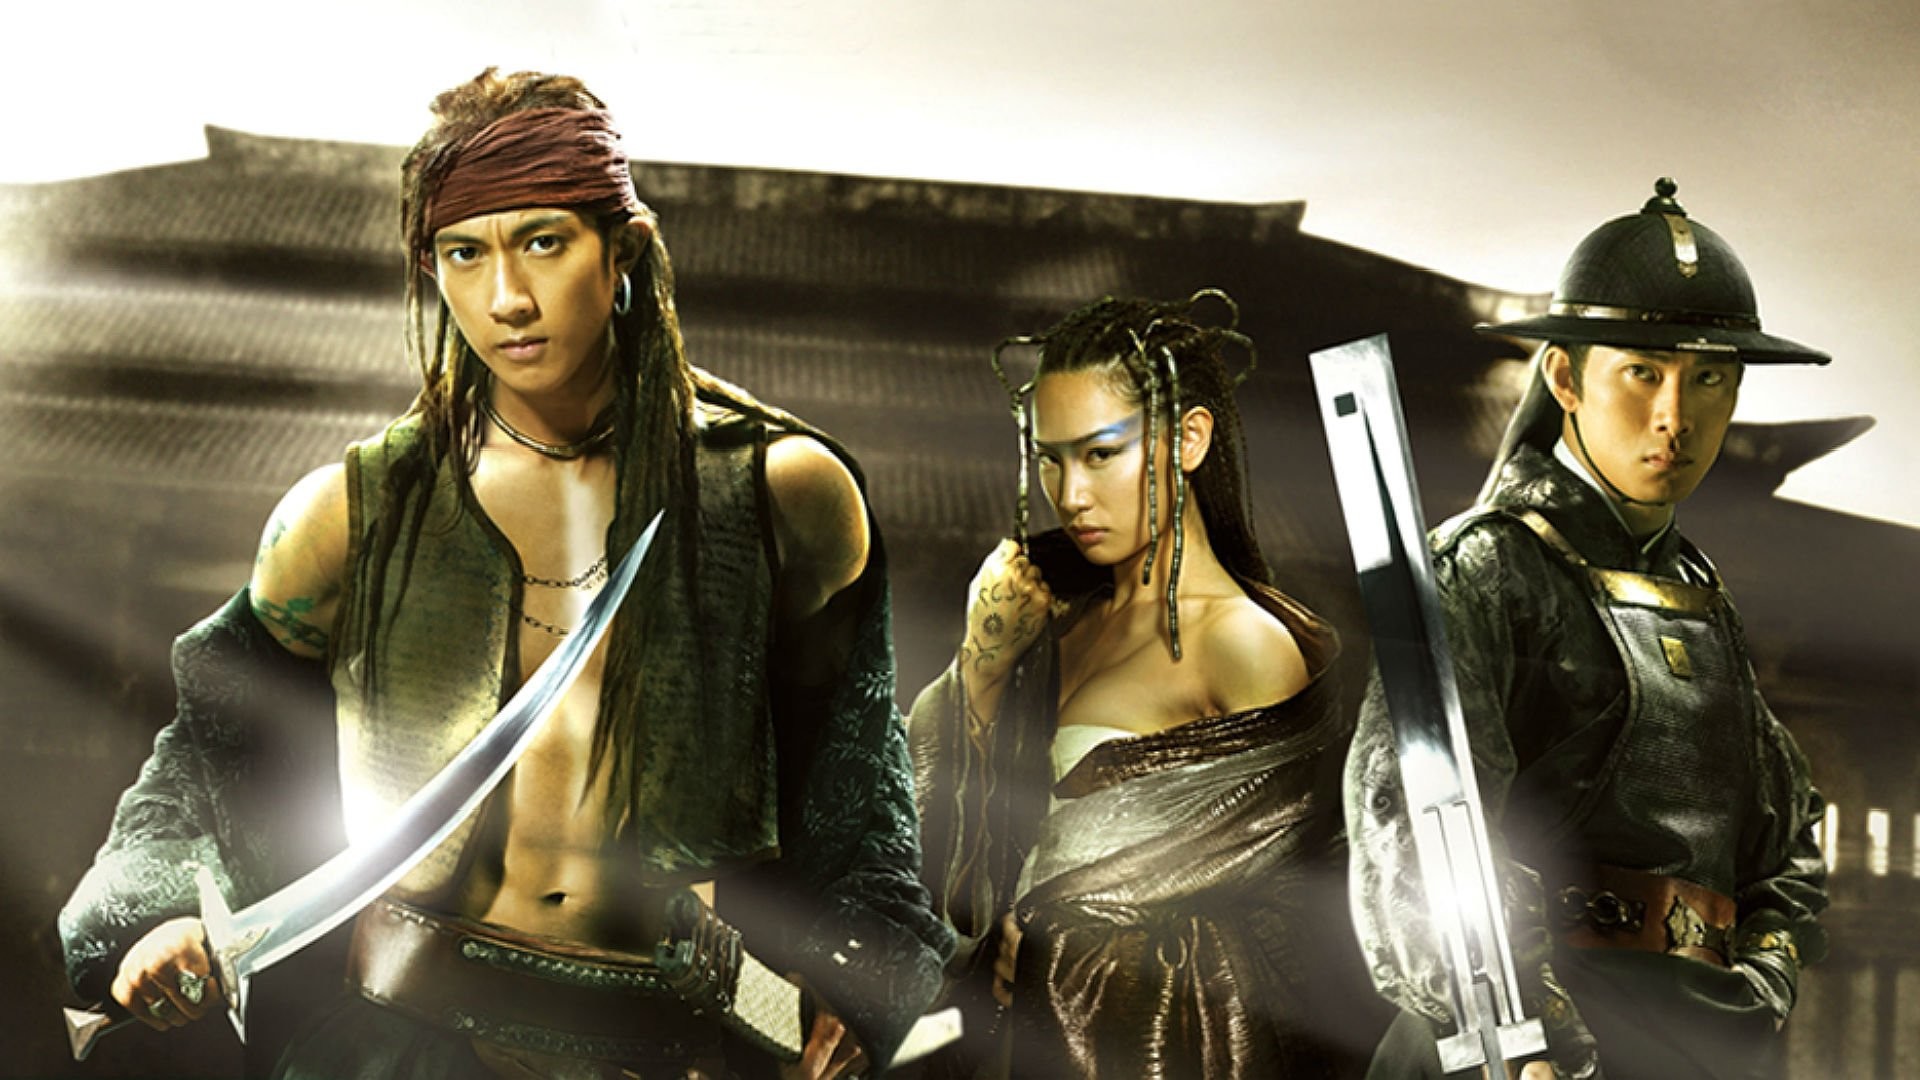 1920x1080 14-BLADES martial arts action drama history fighting blades wuxia wallpaper  |  | 473140 | WallpaperUP